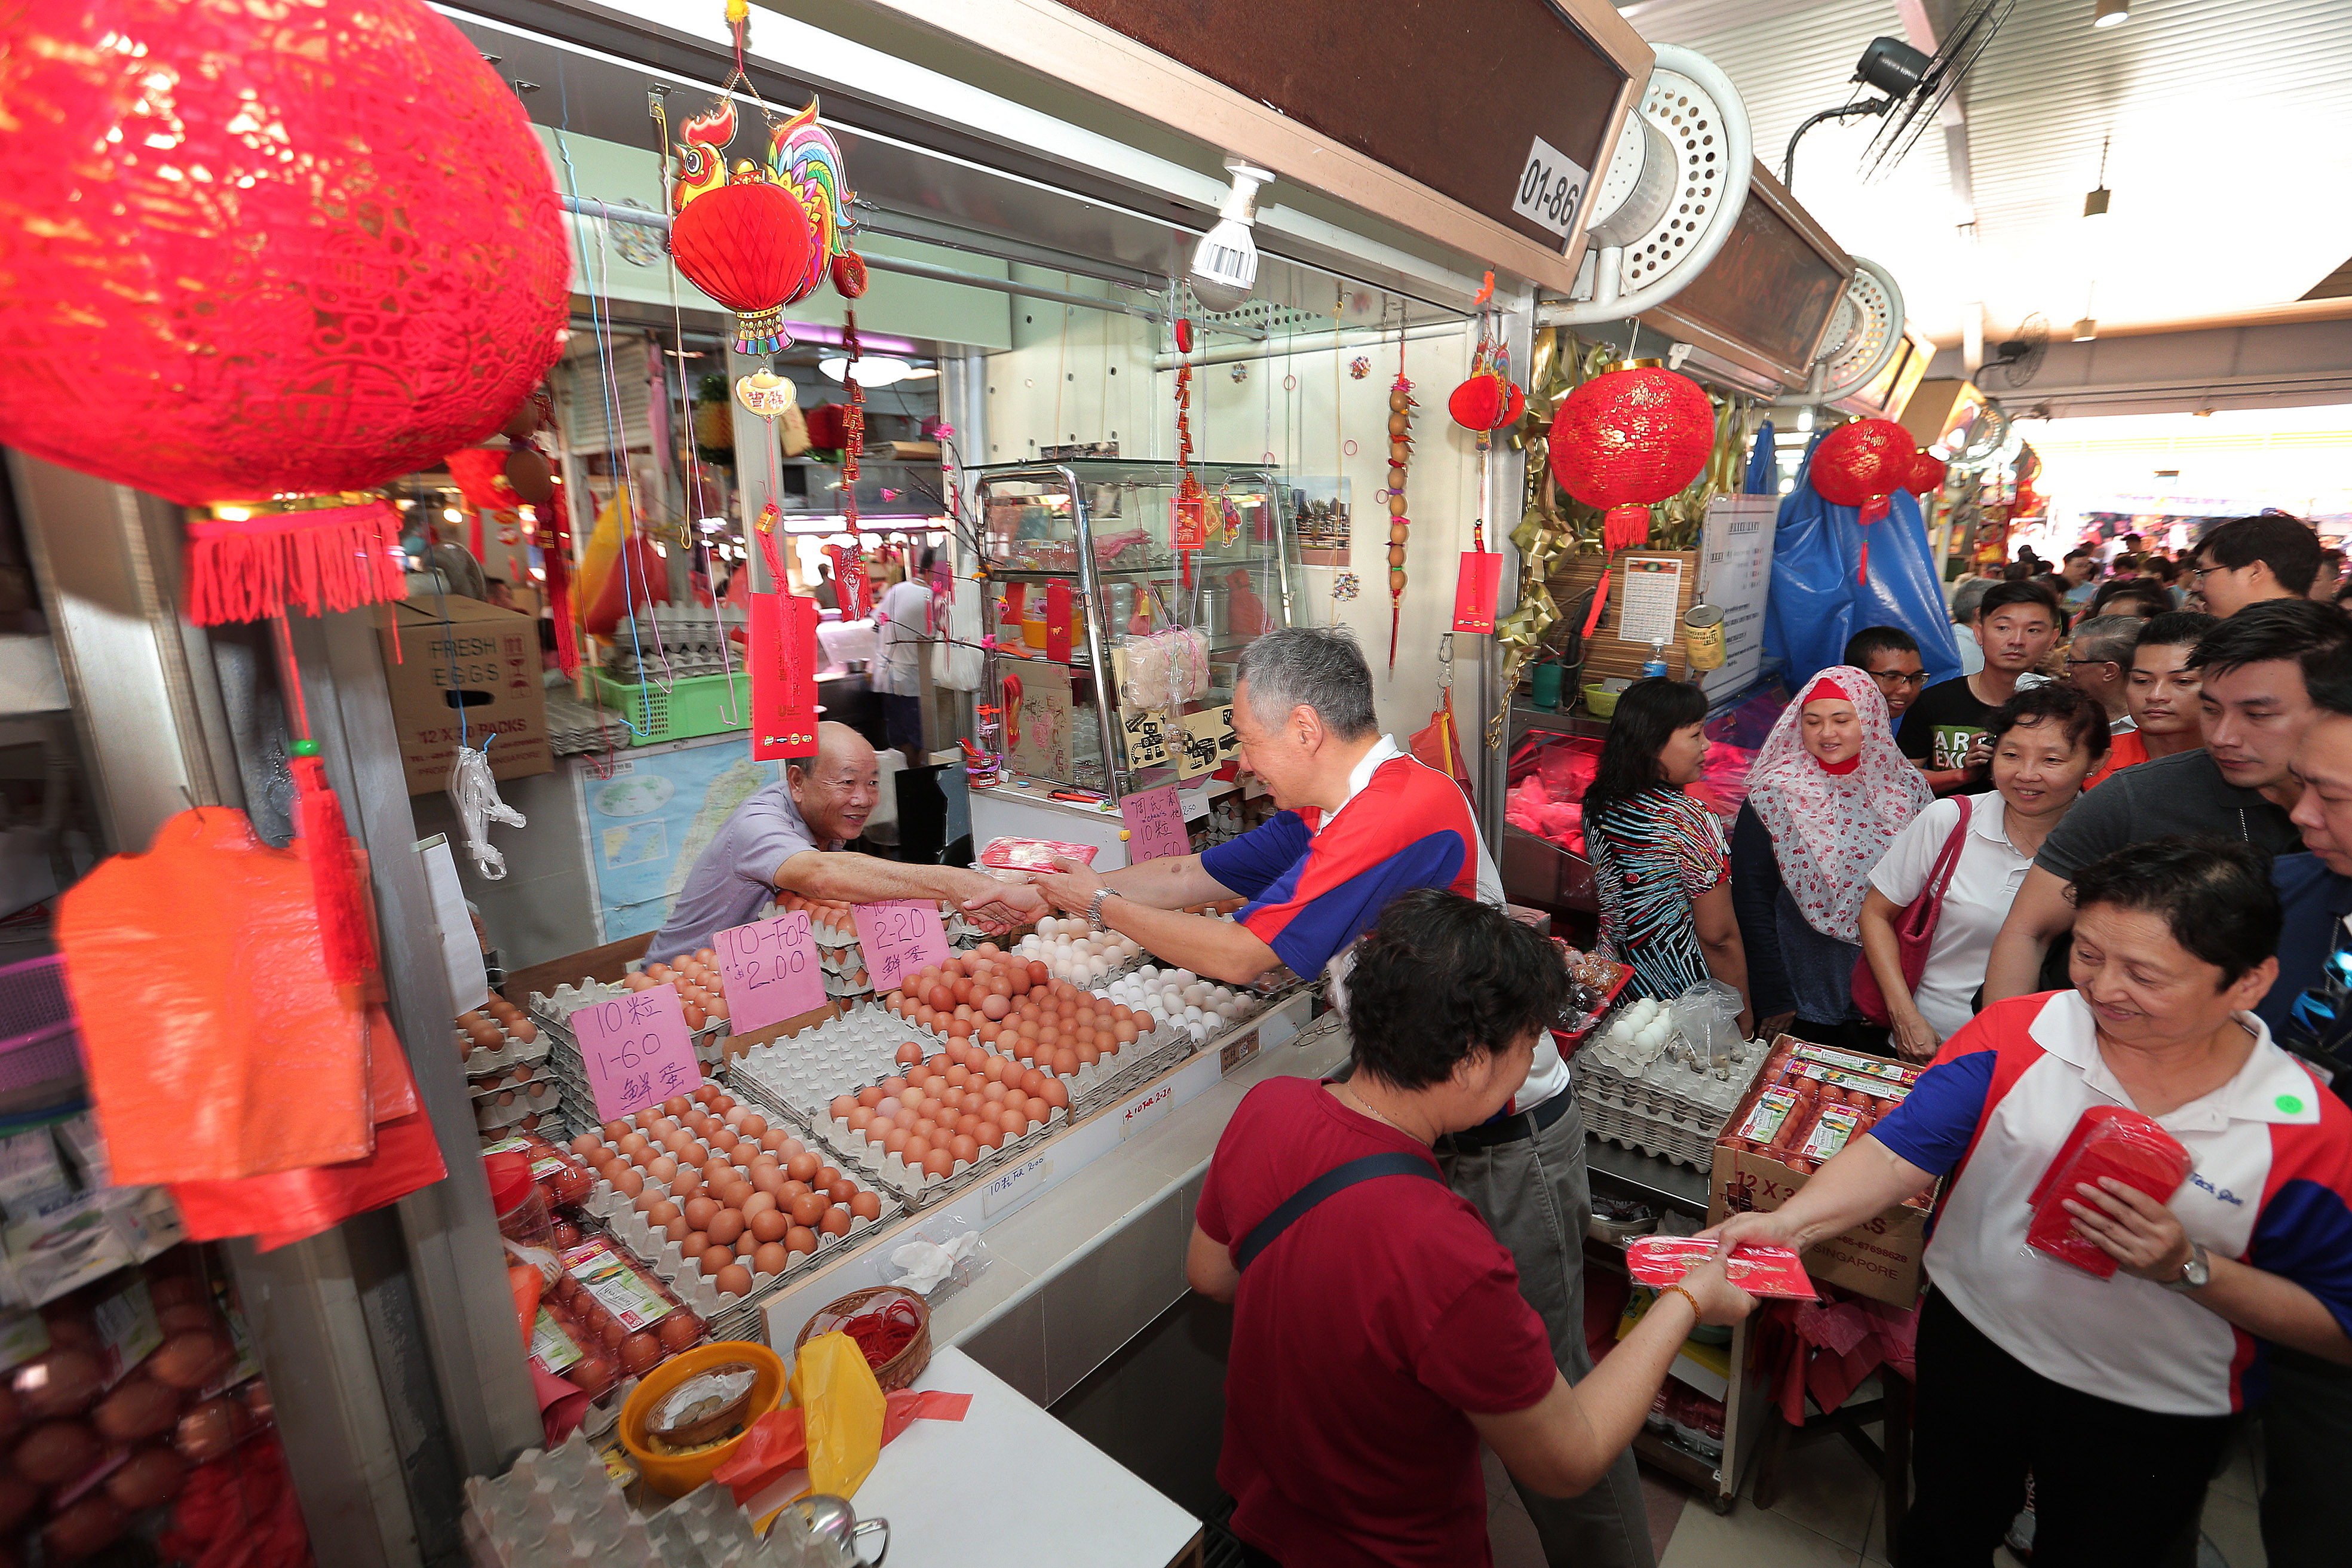 Teck Ghee Hongbao Giveaway and Market Visit on 21 Jan 2017 (MCI Photo by Terence Tan)